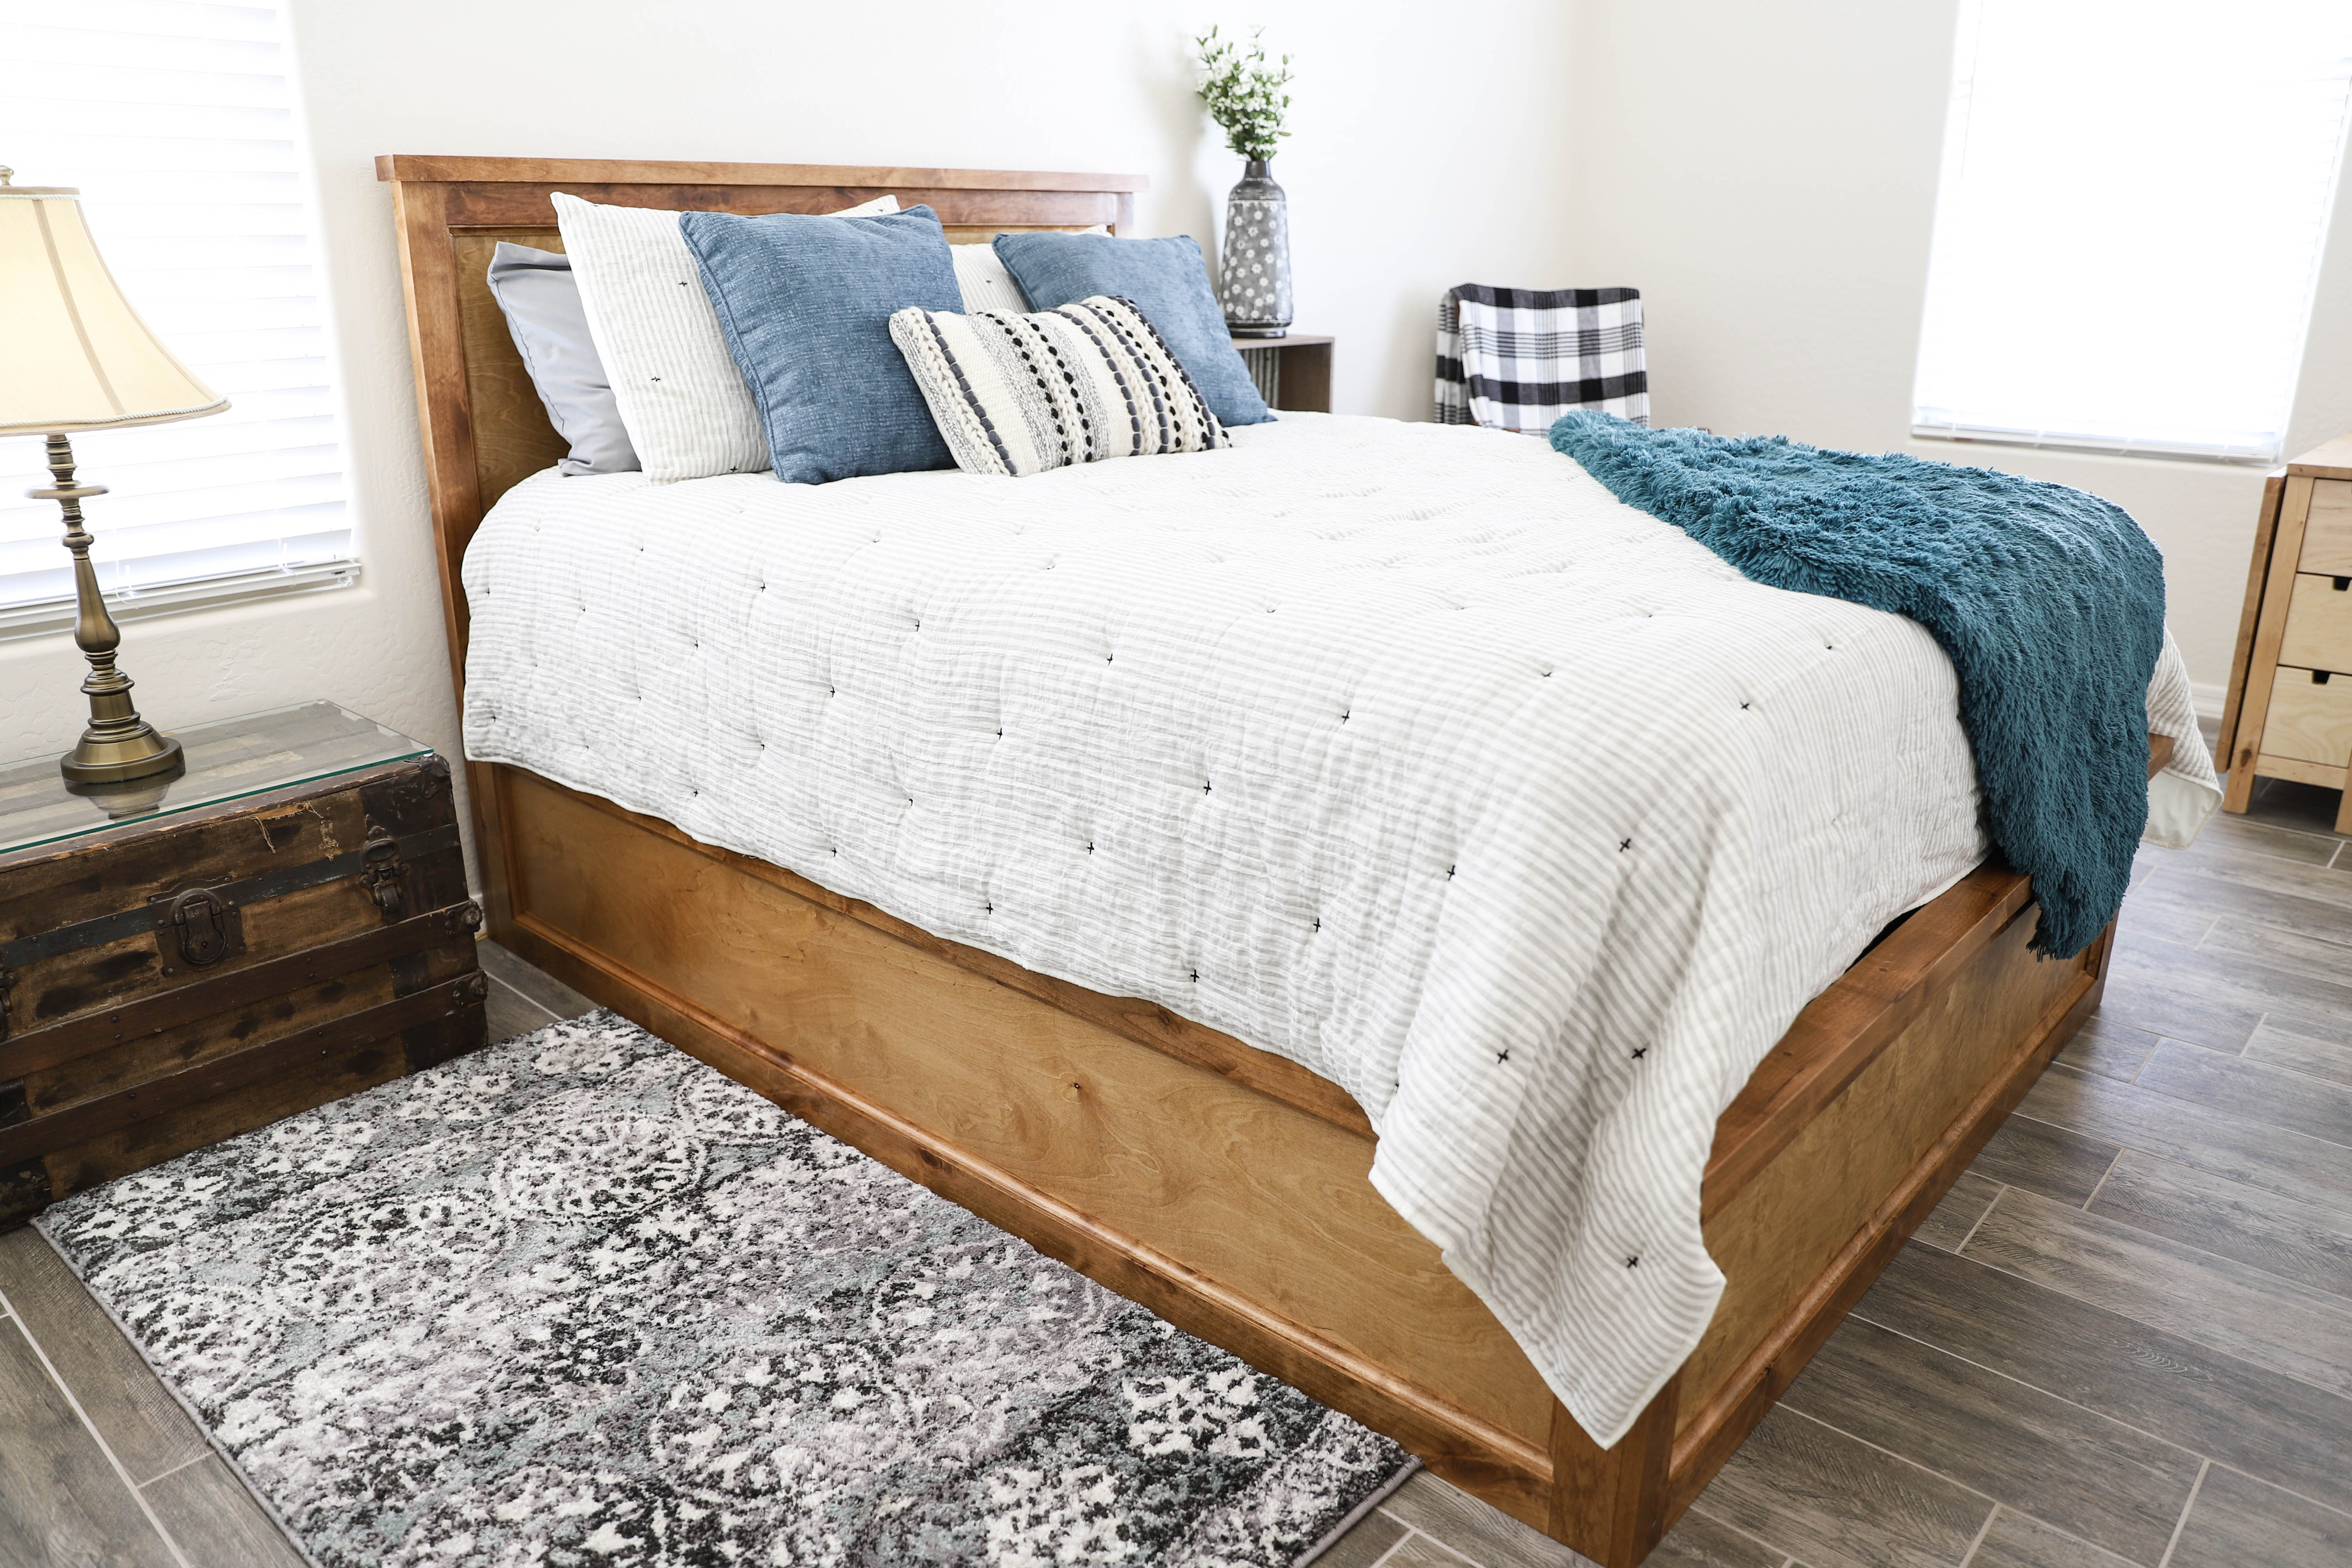 How To Build A Queen Size Storage Bed, What Size Bolts To Attach Headboard Frame